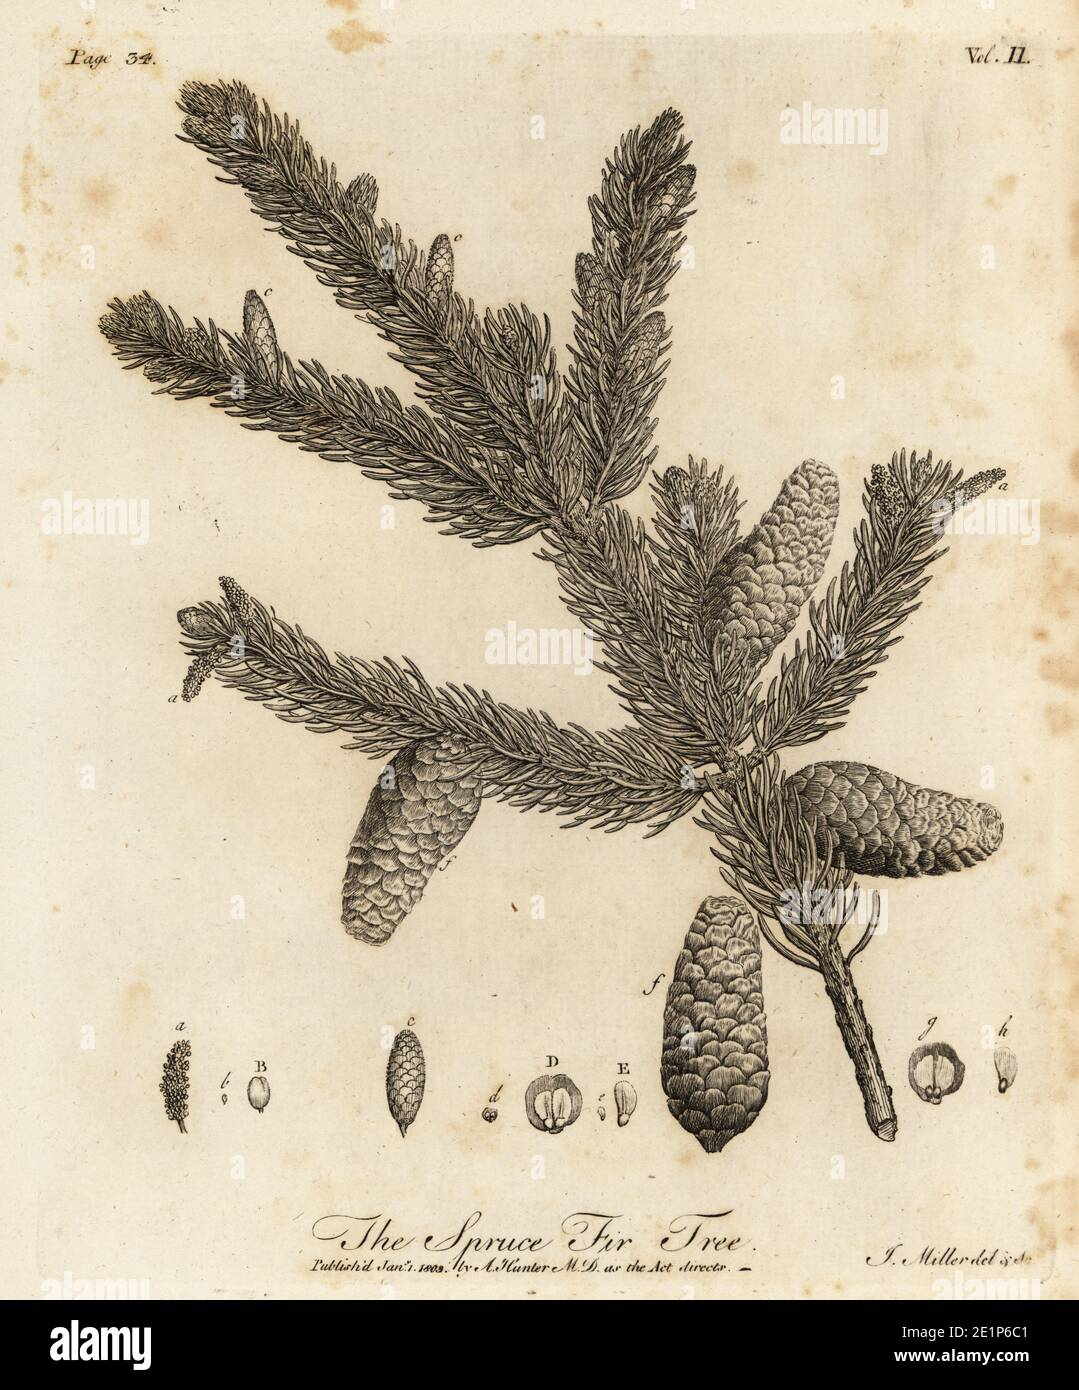 Norway spruce or European spruce, Picea abies. Spruce Fir Tree, Pinus abies. Copperplate engraving drawn and engraved by John Miller (Johann Sebastian Muller) from John Evelyn’s Sylva, or A Discourse of Forest Trees and the Propagation of Timer, J. Dodsley, London, 1776. Stock Photo